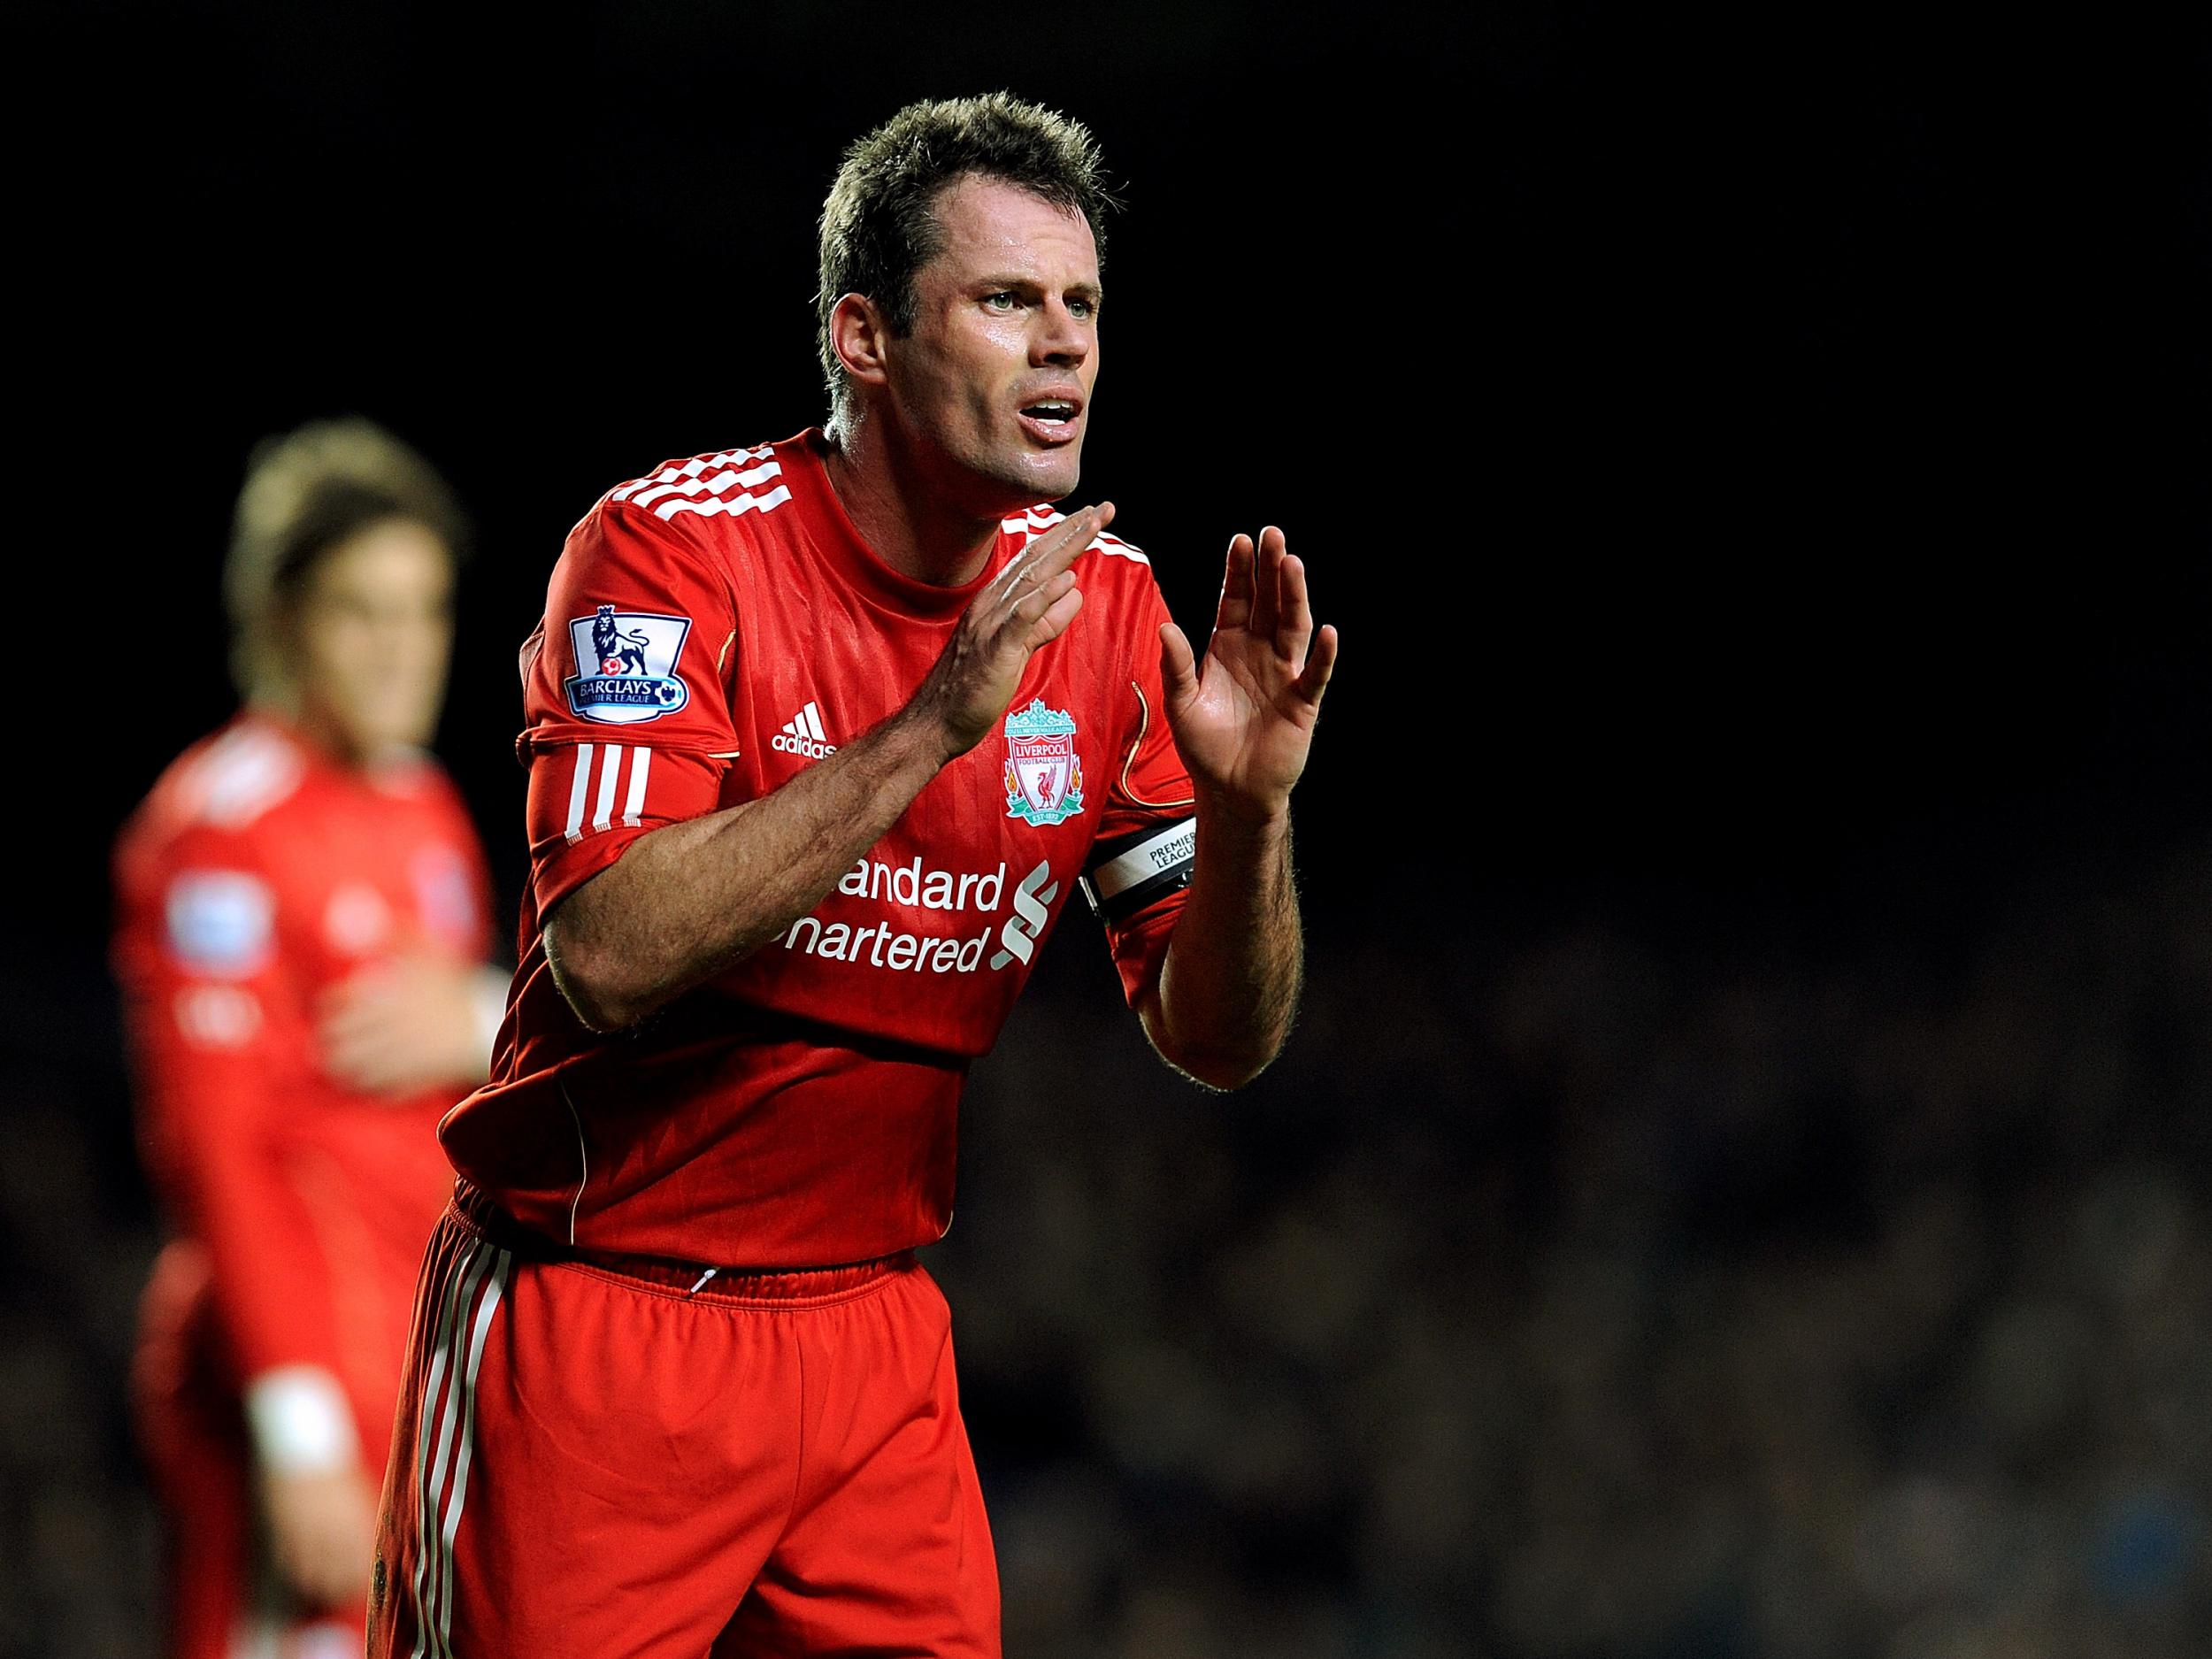 Carragher made over 500 appearances for Liverpool in the Premier League (Getty)